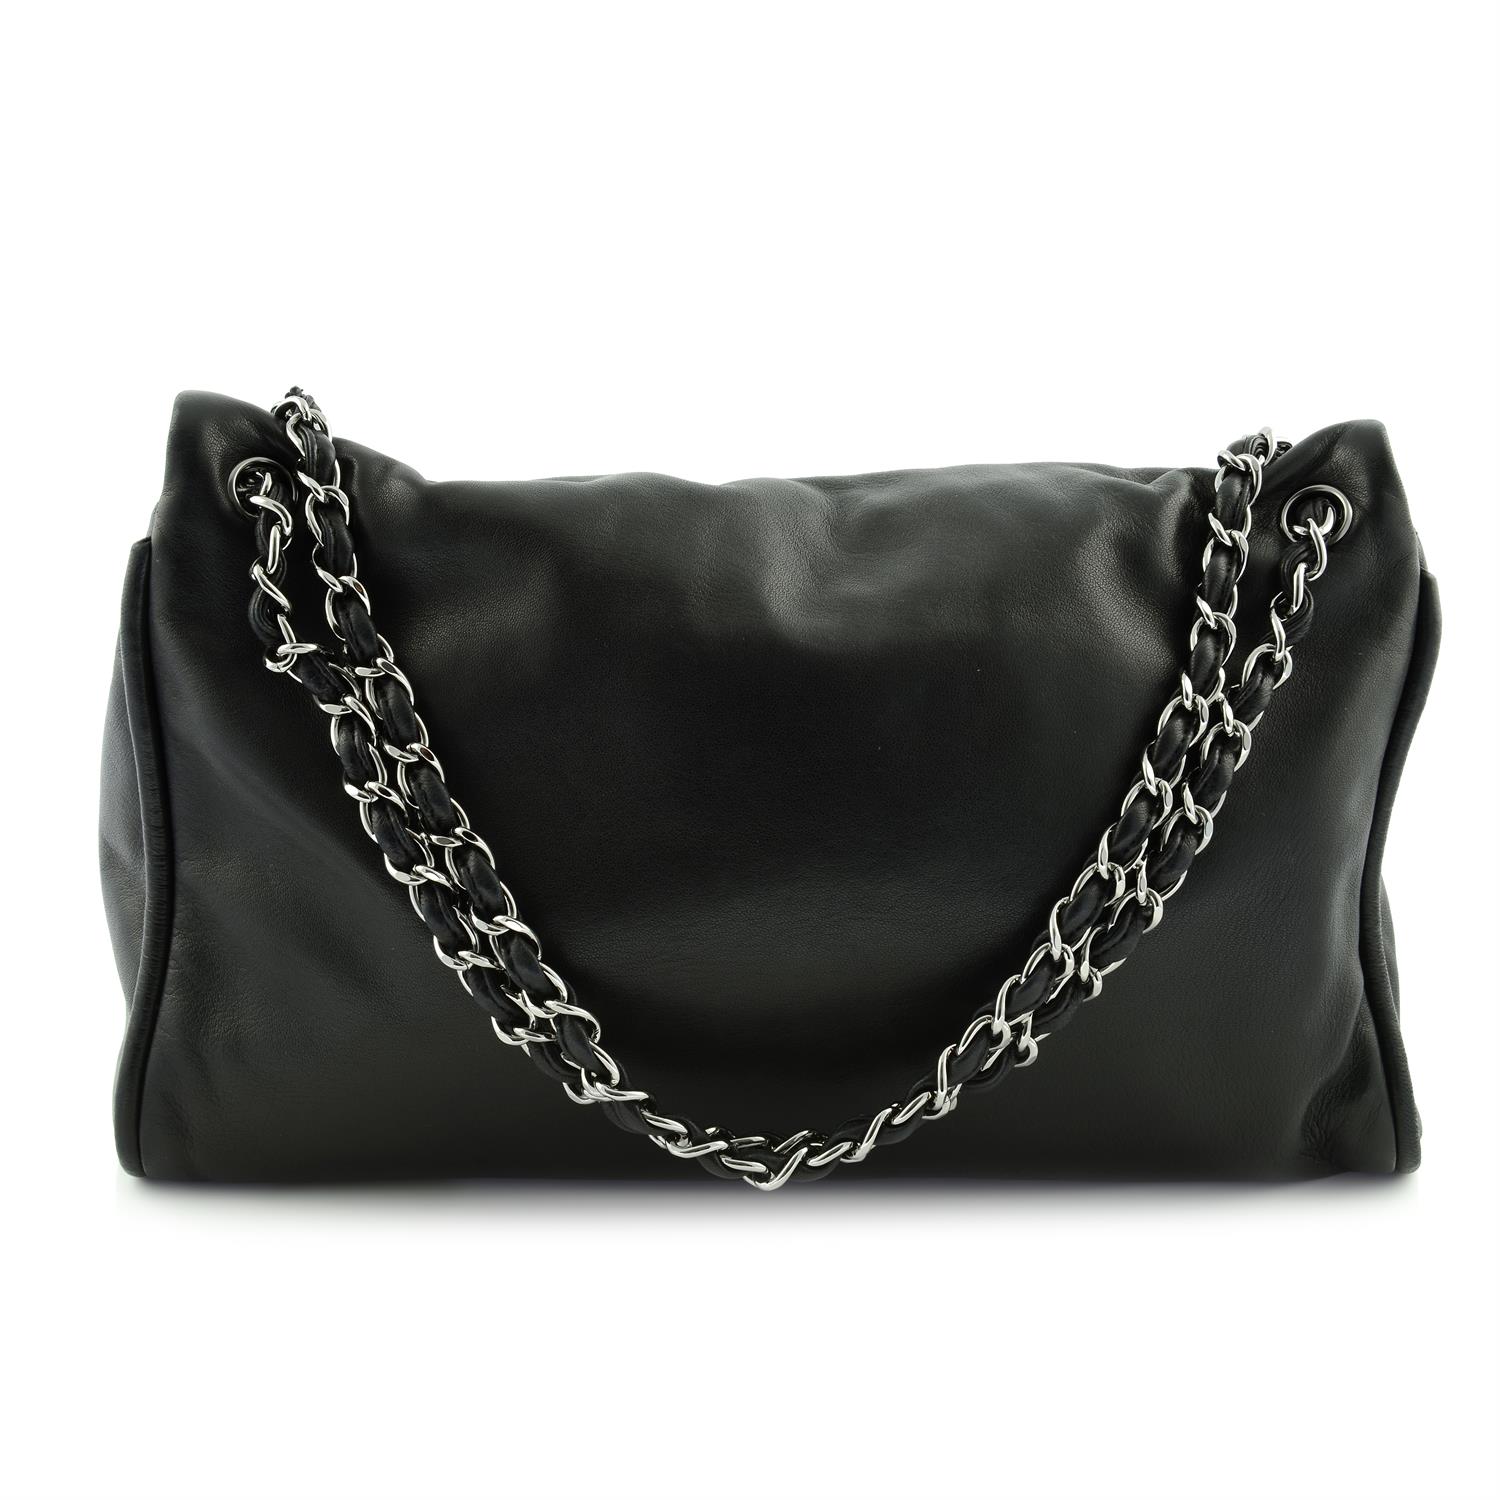 CHANEL - a black lambskin 2.55 Reissue large double flap tote bag. - Image 2 of 4